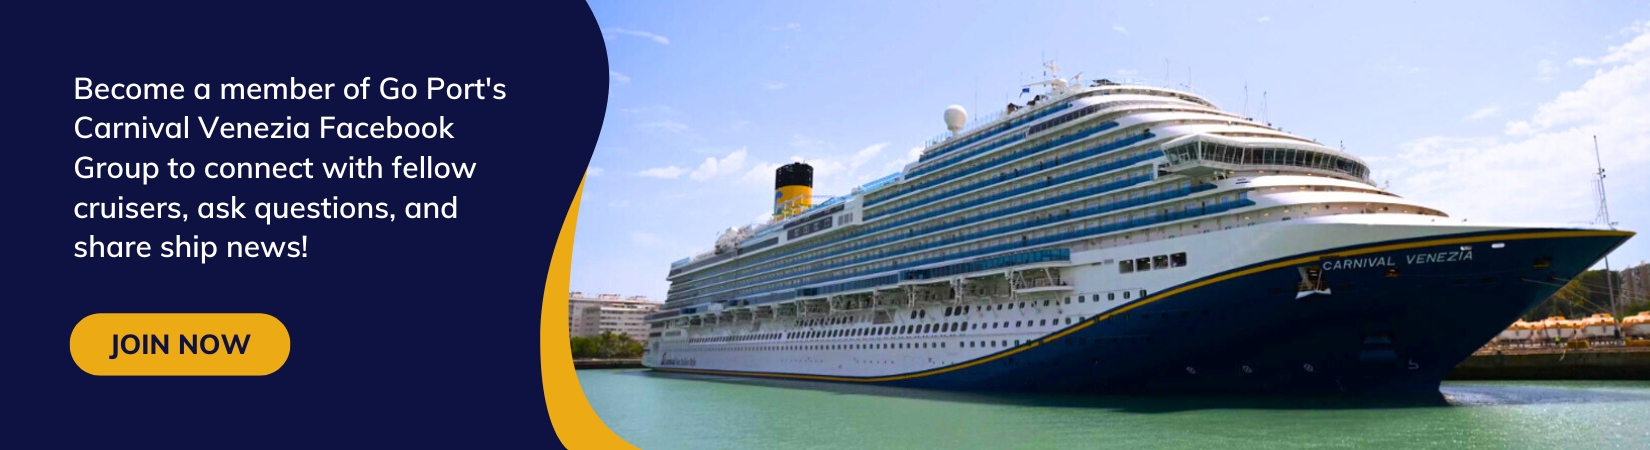 Become a member of Go Port's Carnival Venezia Facebook Group to connect with fellow cruisers, ask questions, and share ship news! Yellow "Join Now" button